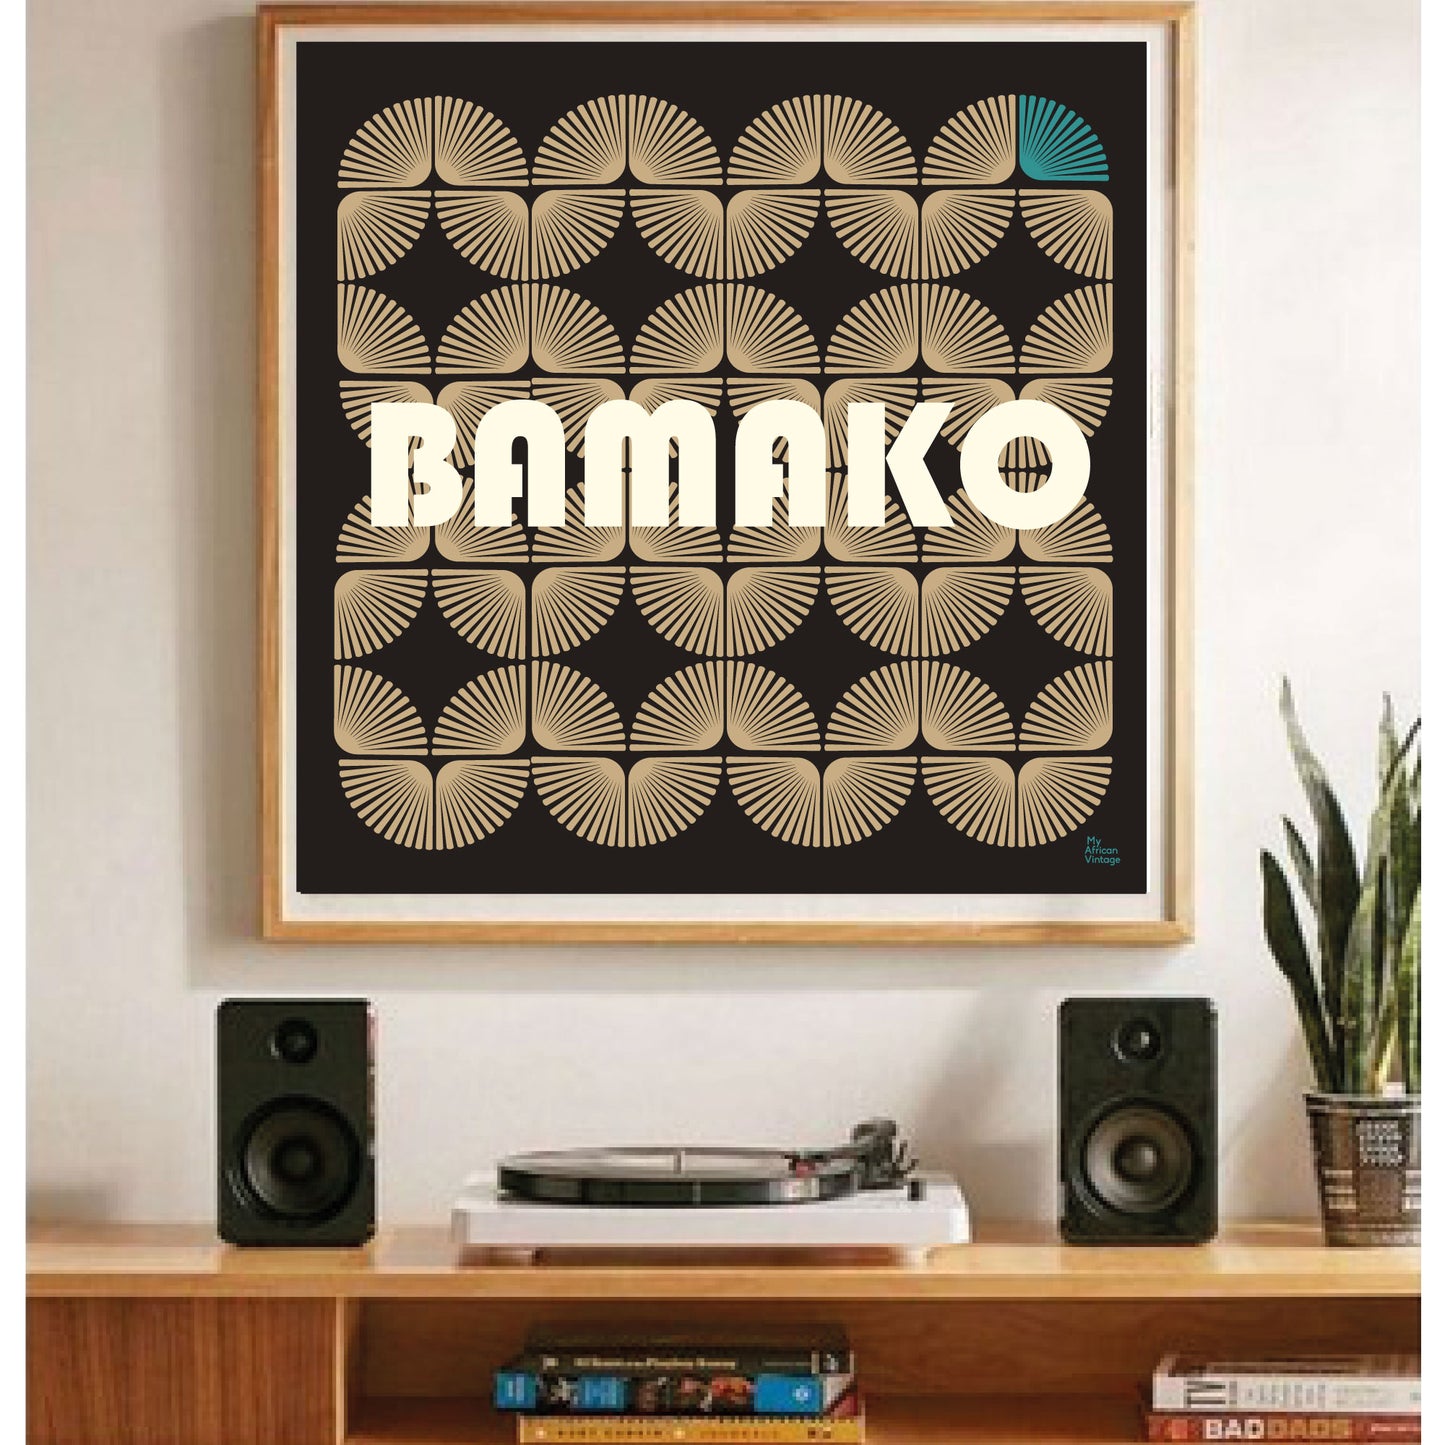 "Bamako" retro style poster - "My African Vintage" collection